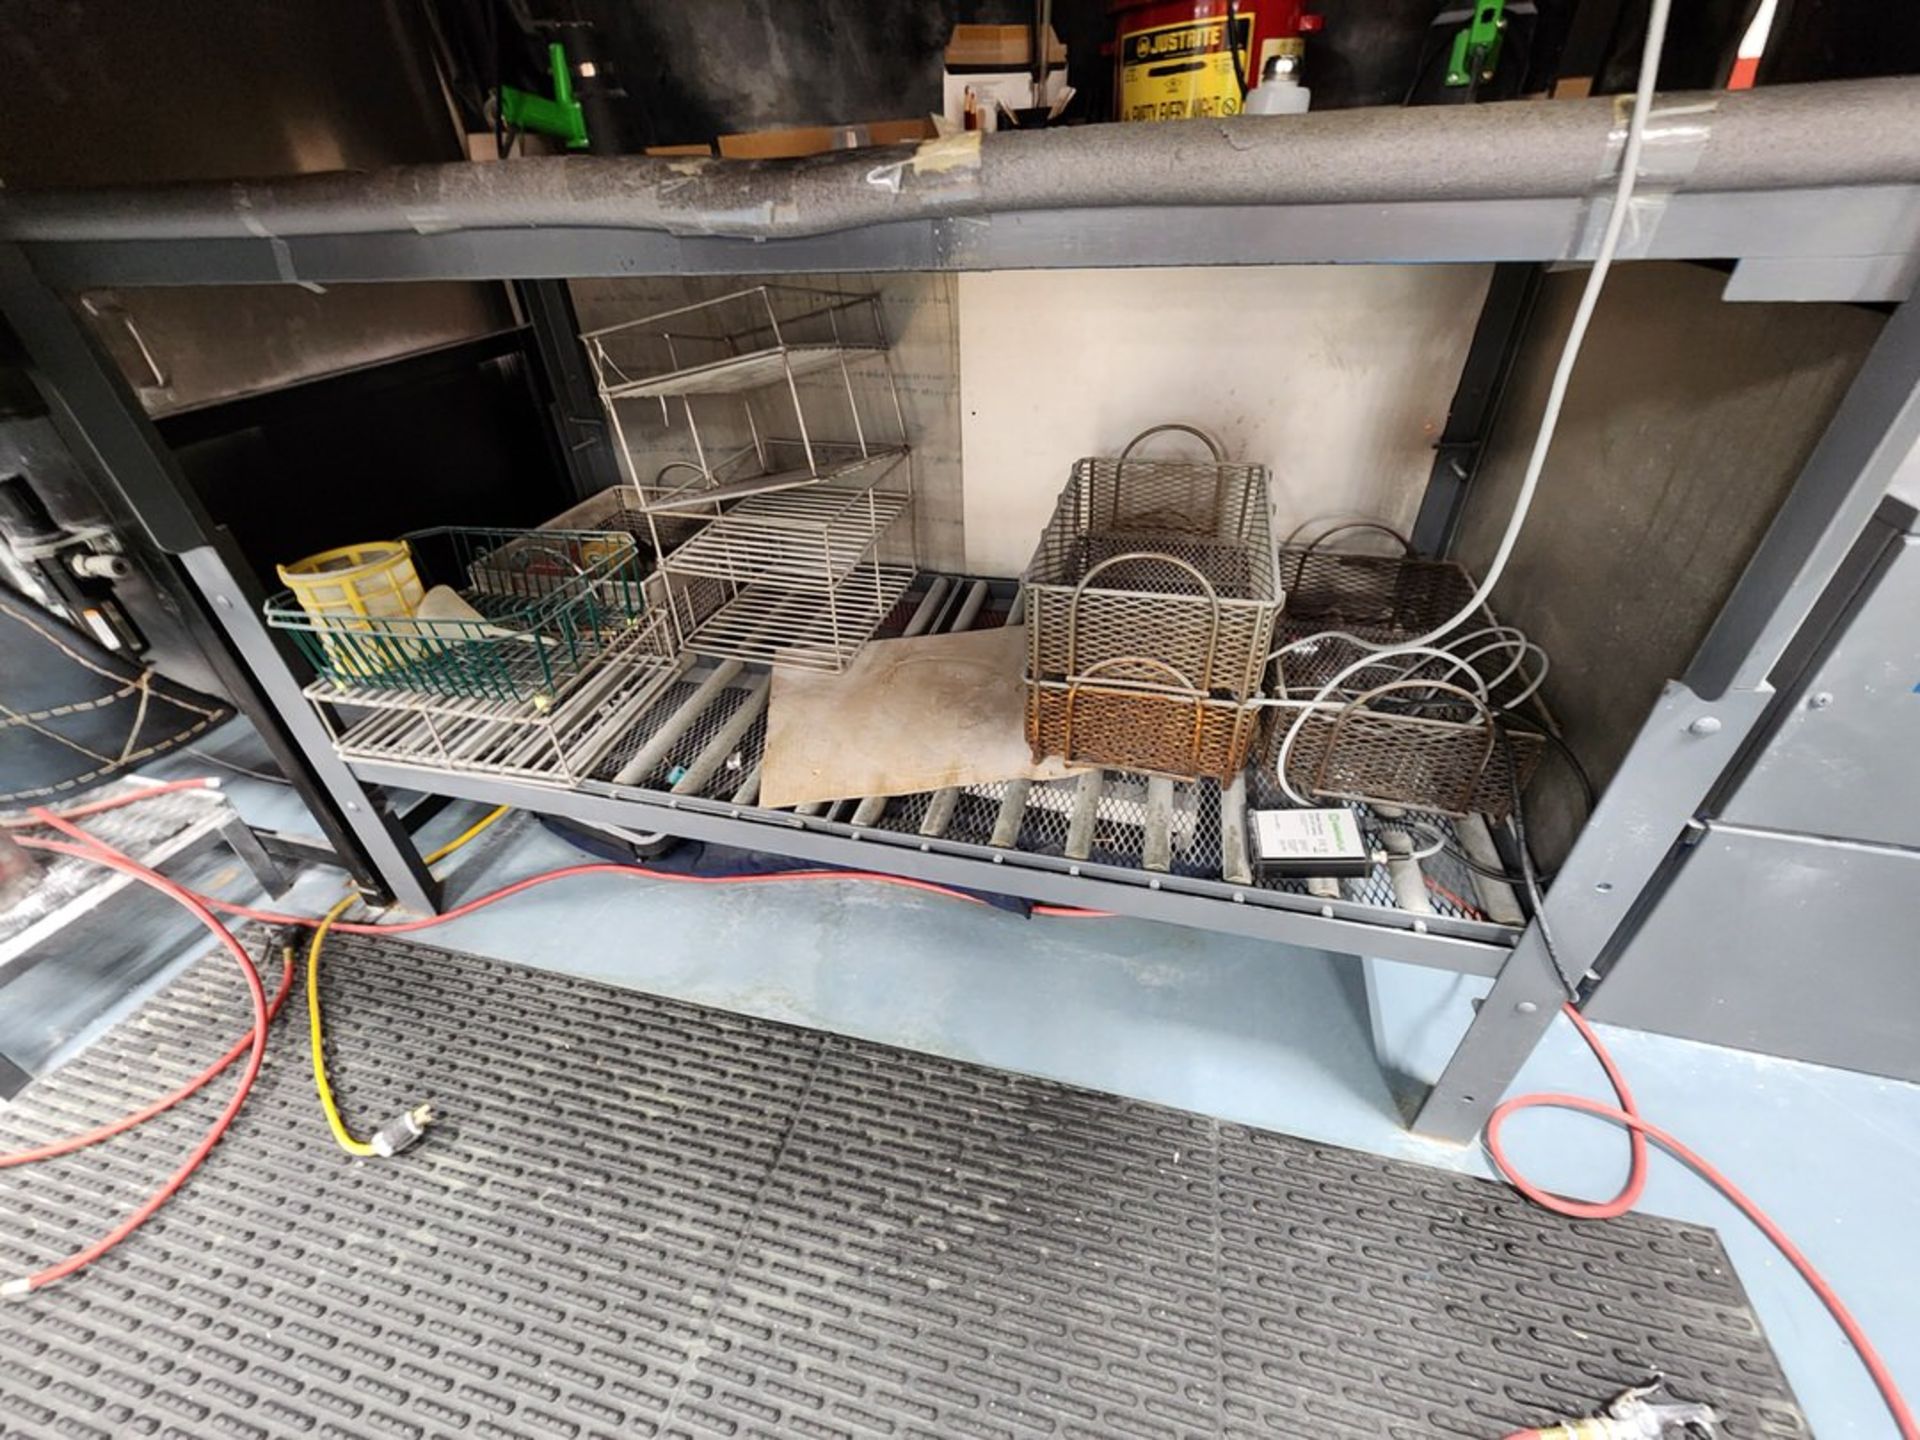 Zyglo Testing Oven W/ Honeywell Controller (Asset# 70607); W/ Magnaflux Inspection Station & - Image 20 of 27